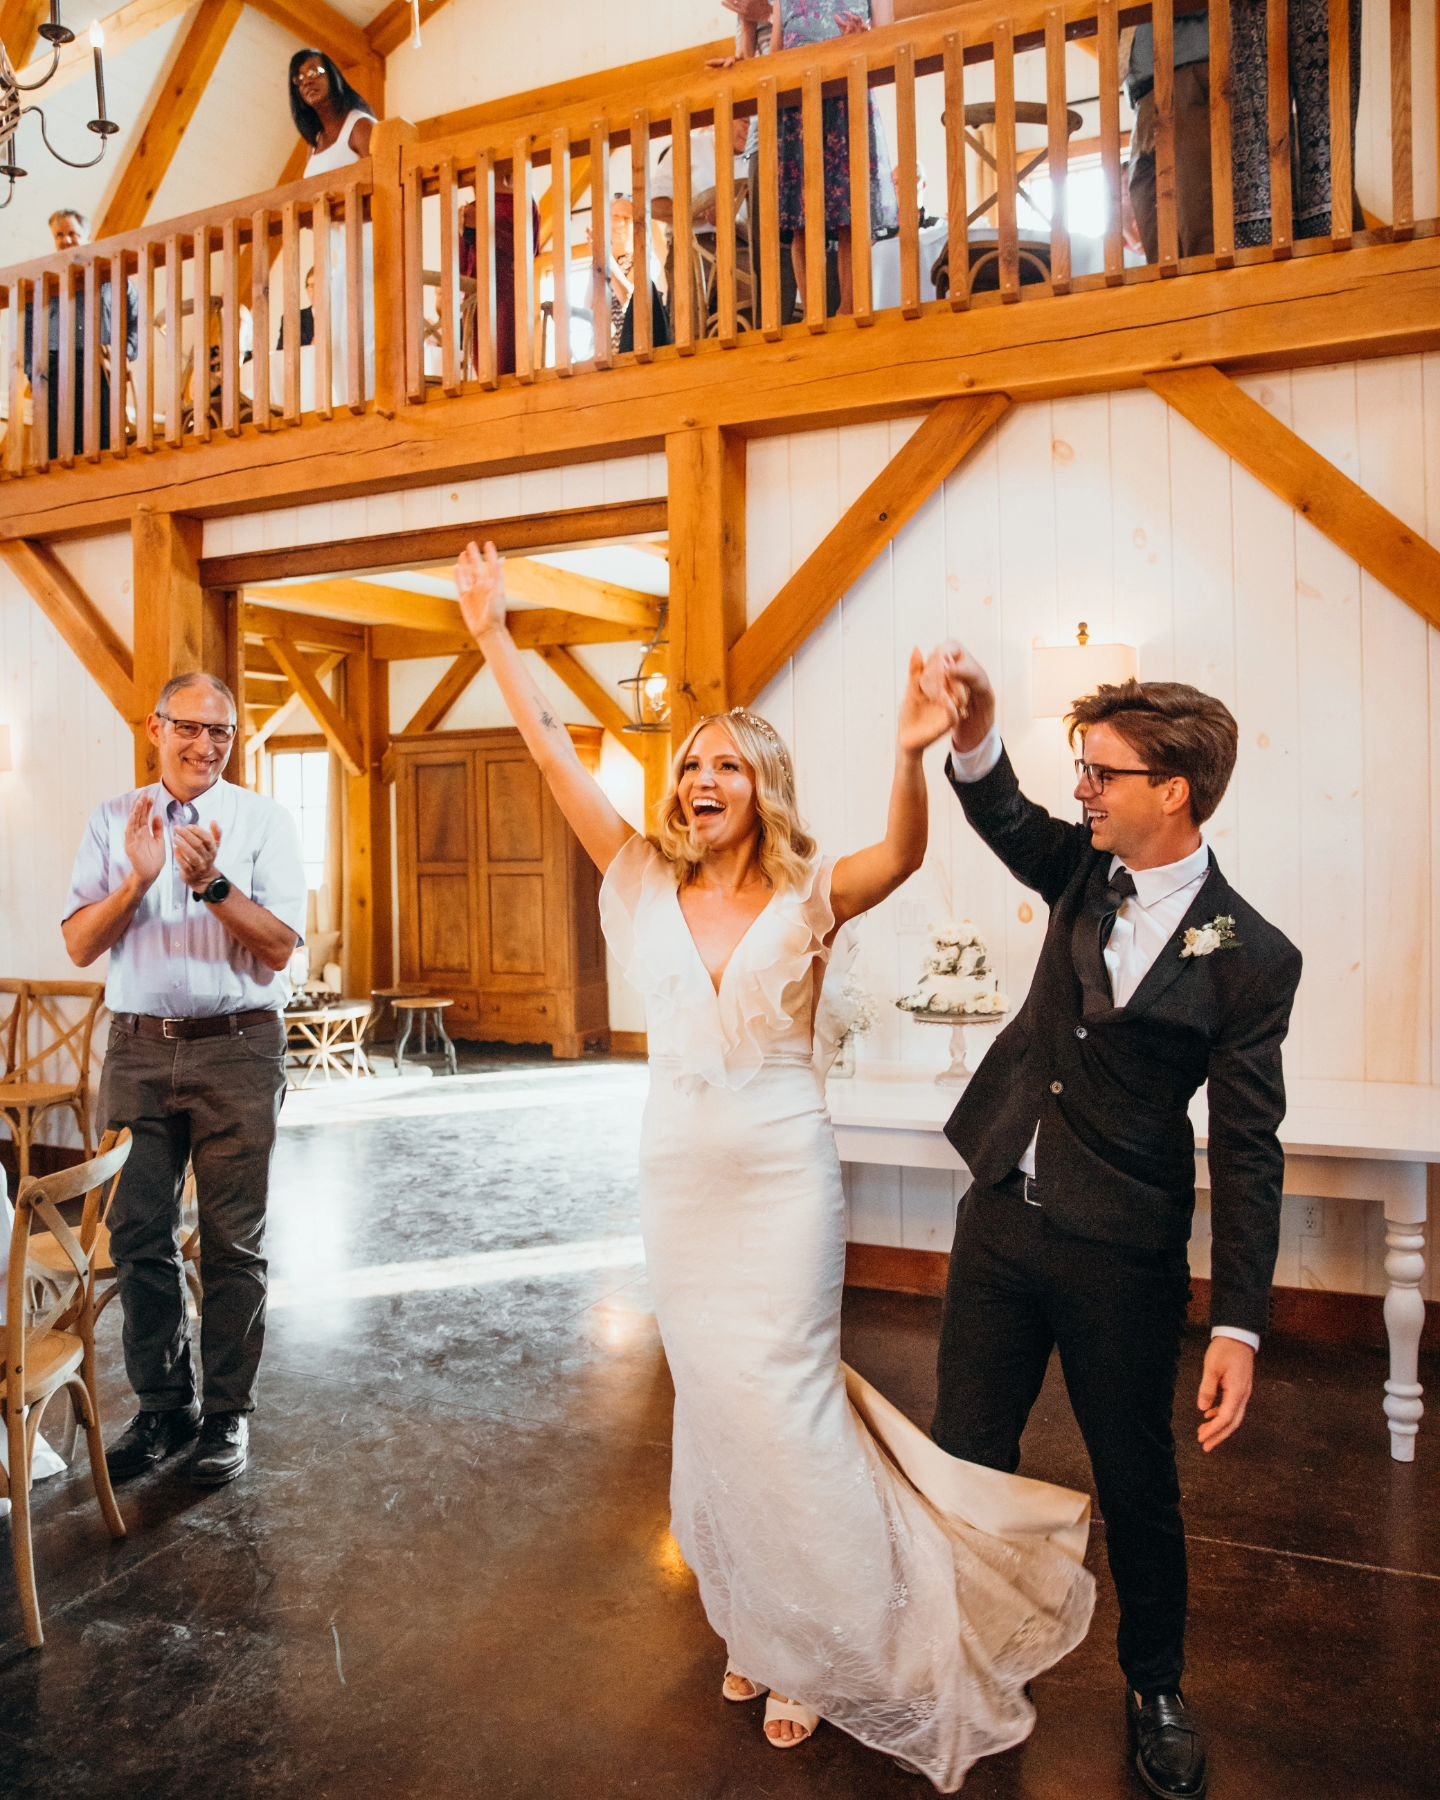 My brides prioritize creating a wedding day filled with connections and cherished moments alongside their closest friends and loved ones.

They seek to curate an heirloom experience that will be treasured for years to come, not just for themselves bu